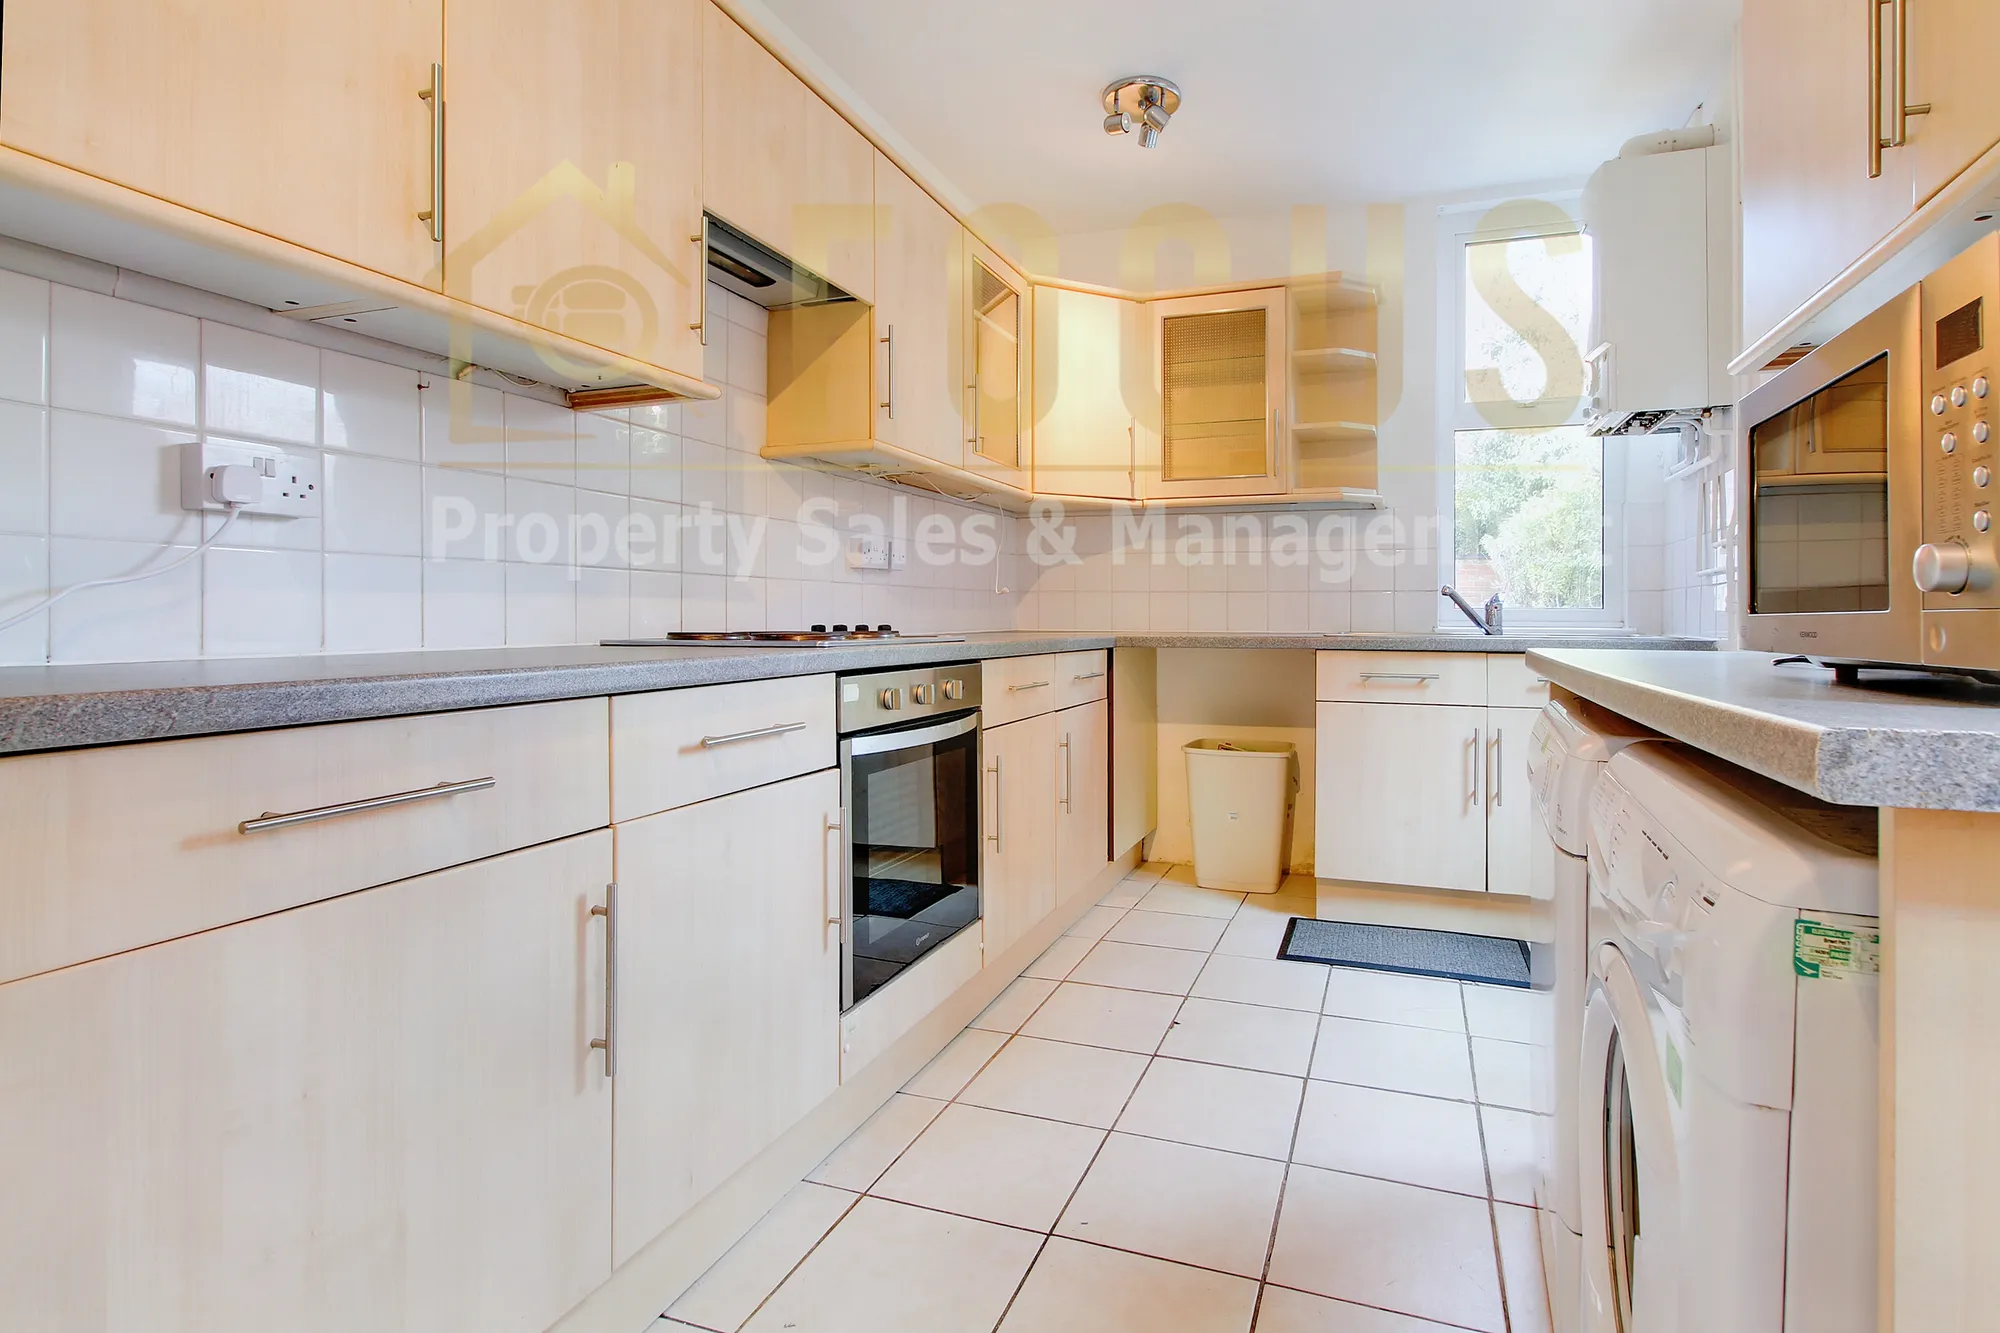 4 bed mid-terraced house to rent in Lytham Road, Leicester  - Property Image 6